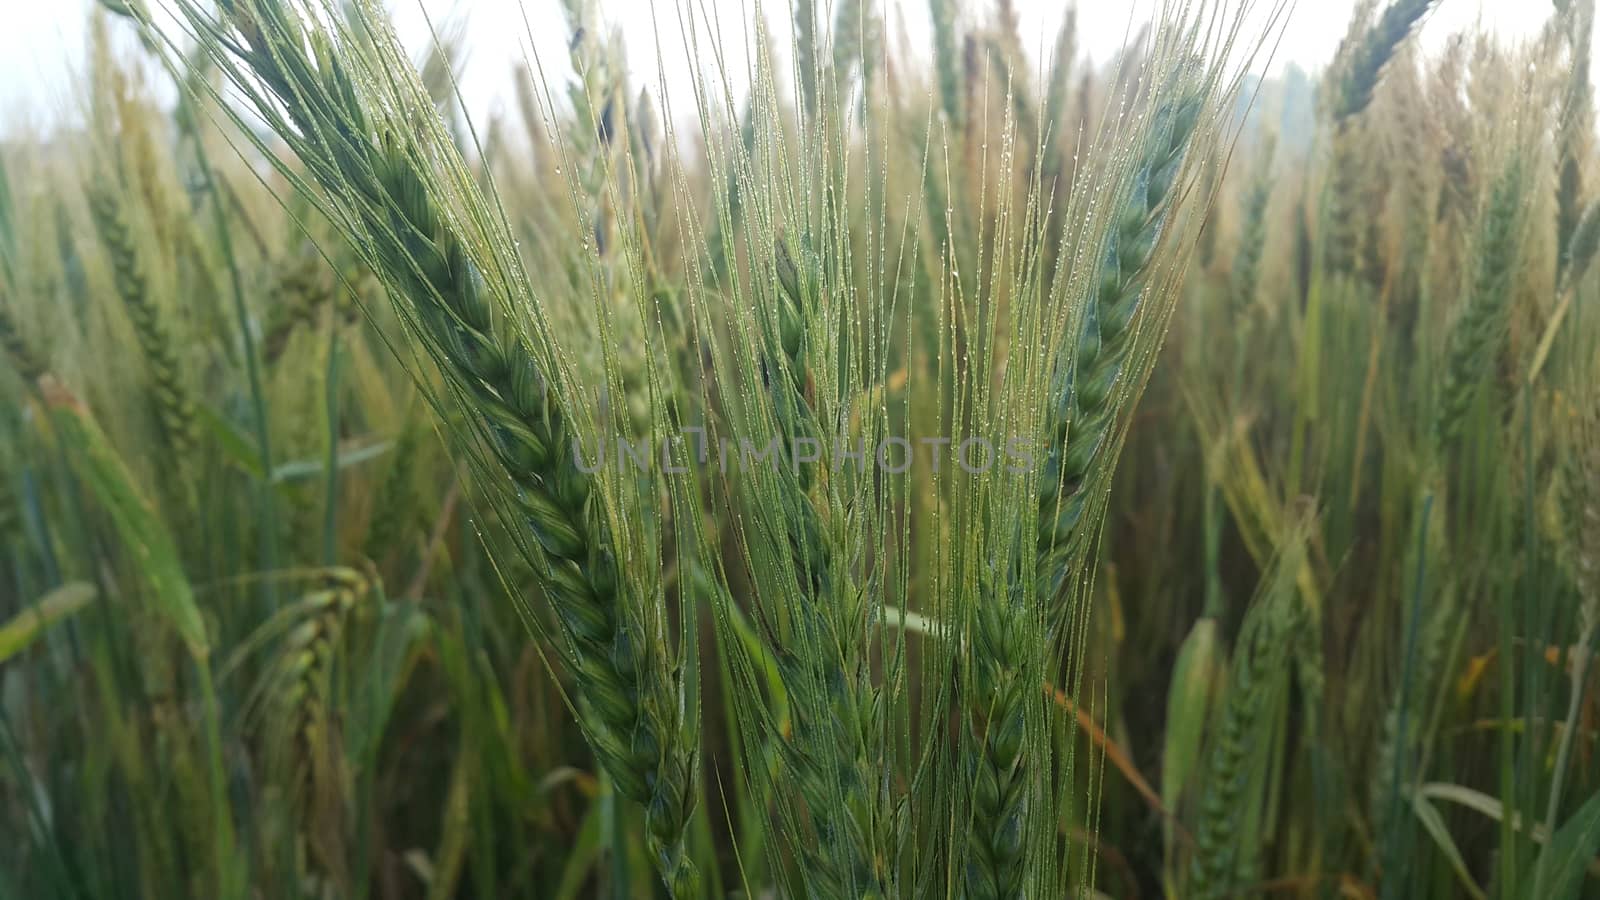 Closeup view of barley spikelets or rye in barley field. Green dried barley focused in large agricultural rural wheat field.